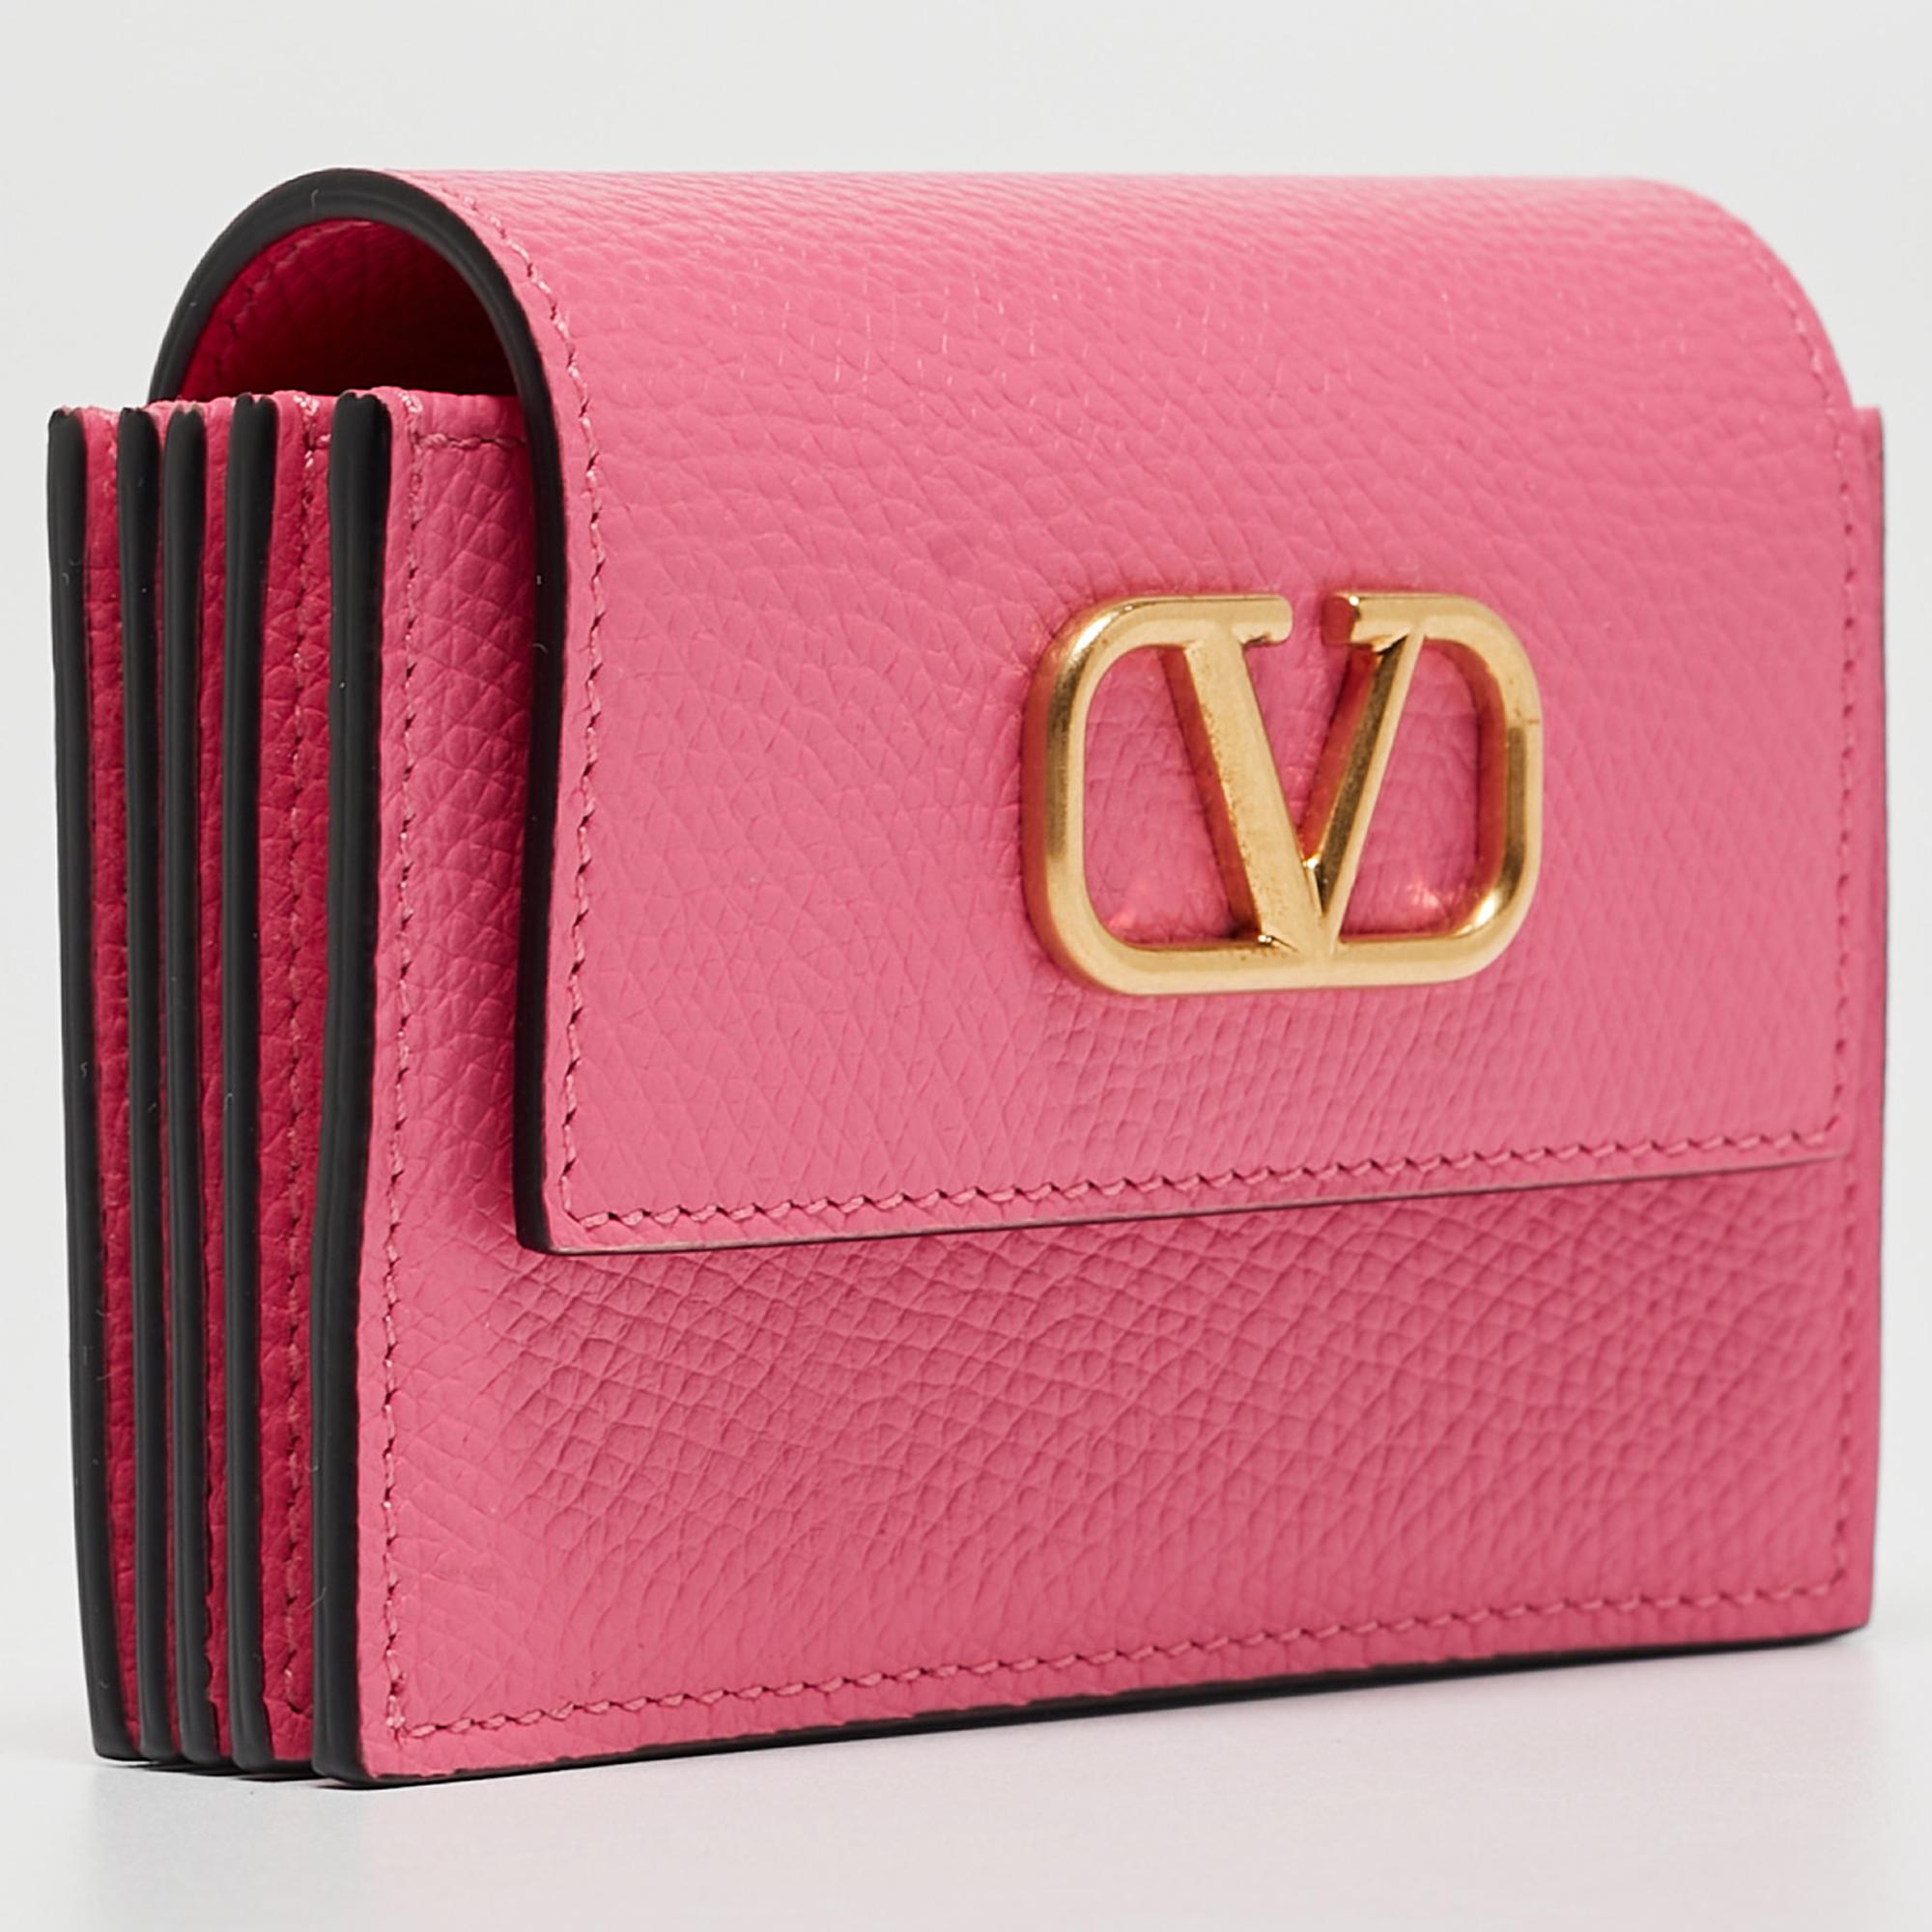 The Valentino card holder is a practical accessory highlighted by the famous VLogo. This compact and stylish piece is perfect for organizing and carrying your cards and cash with a touch of elegance.


Includes
Original Dustbag, Original Box